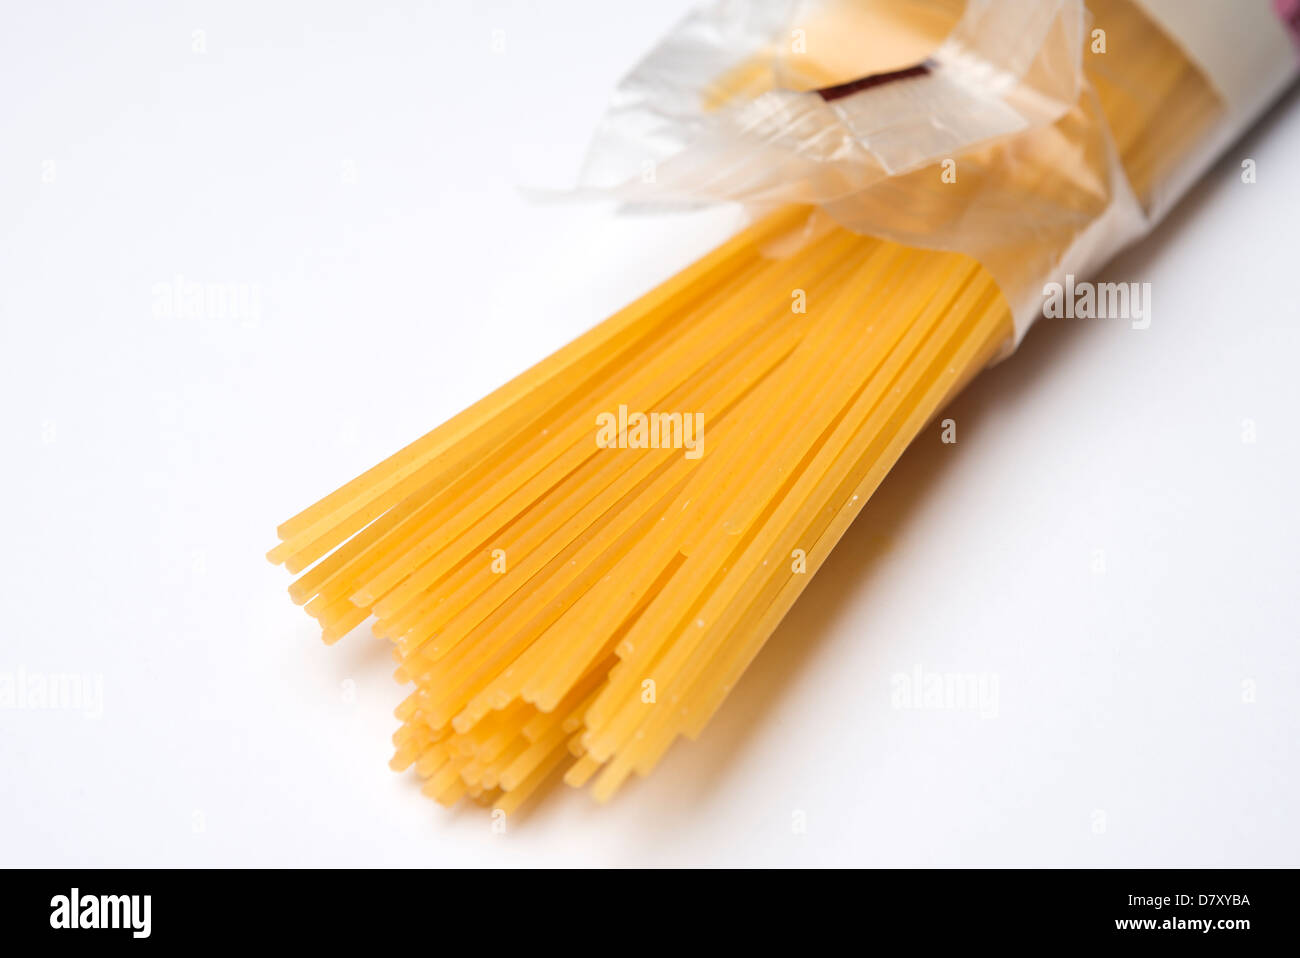 Packet of pasta 3080 for sale